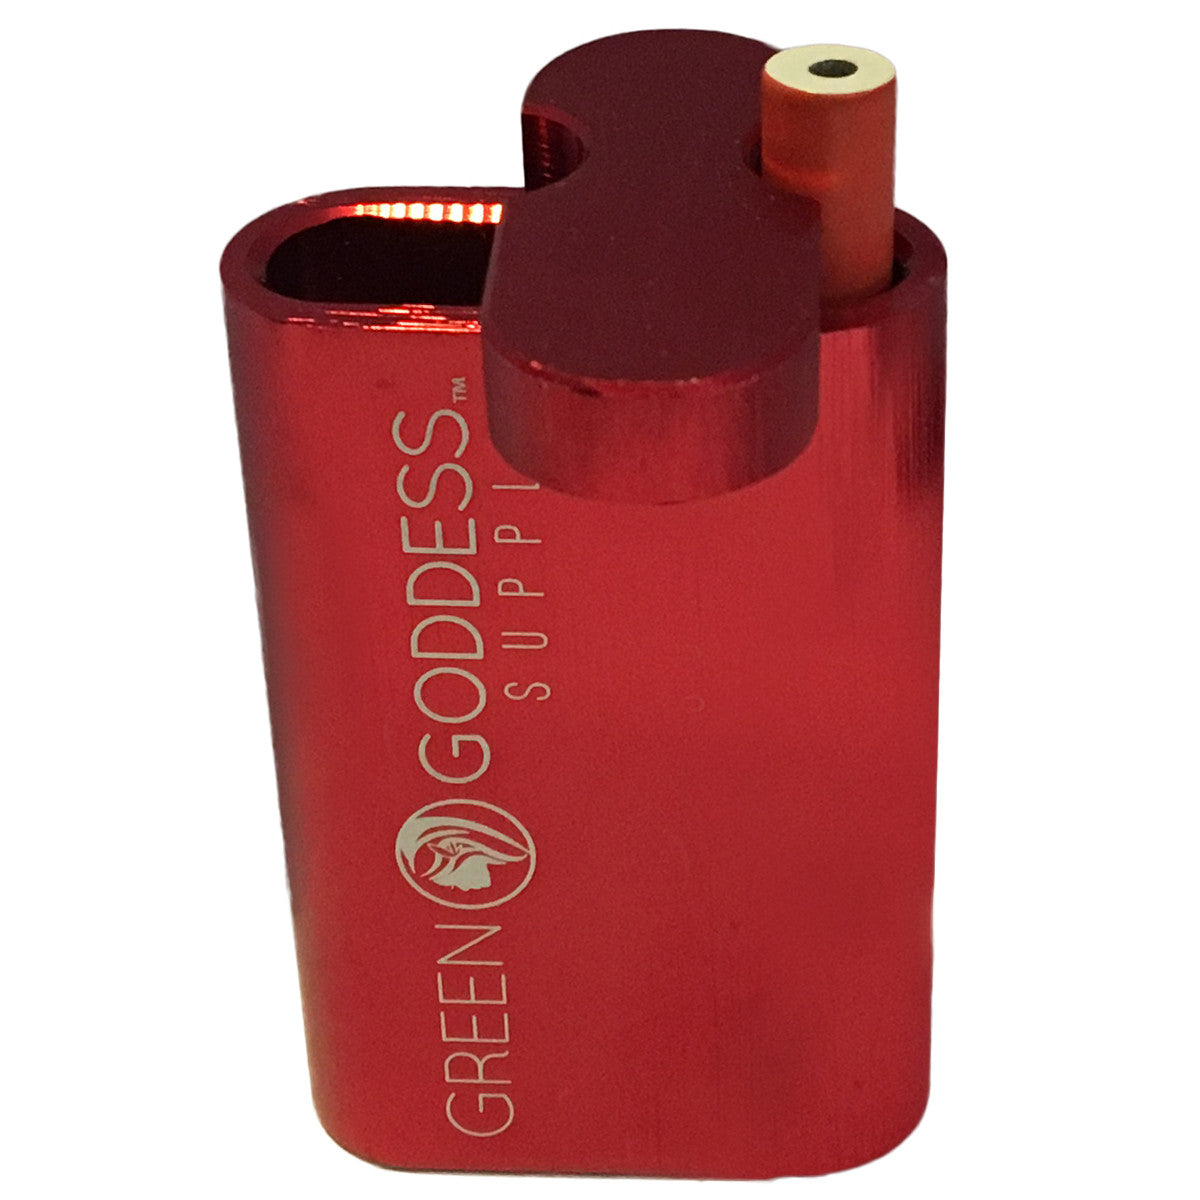 3" Anodized Aluminum Dugout - Red - Green Goddess Supply